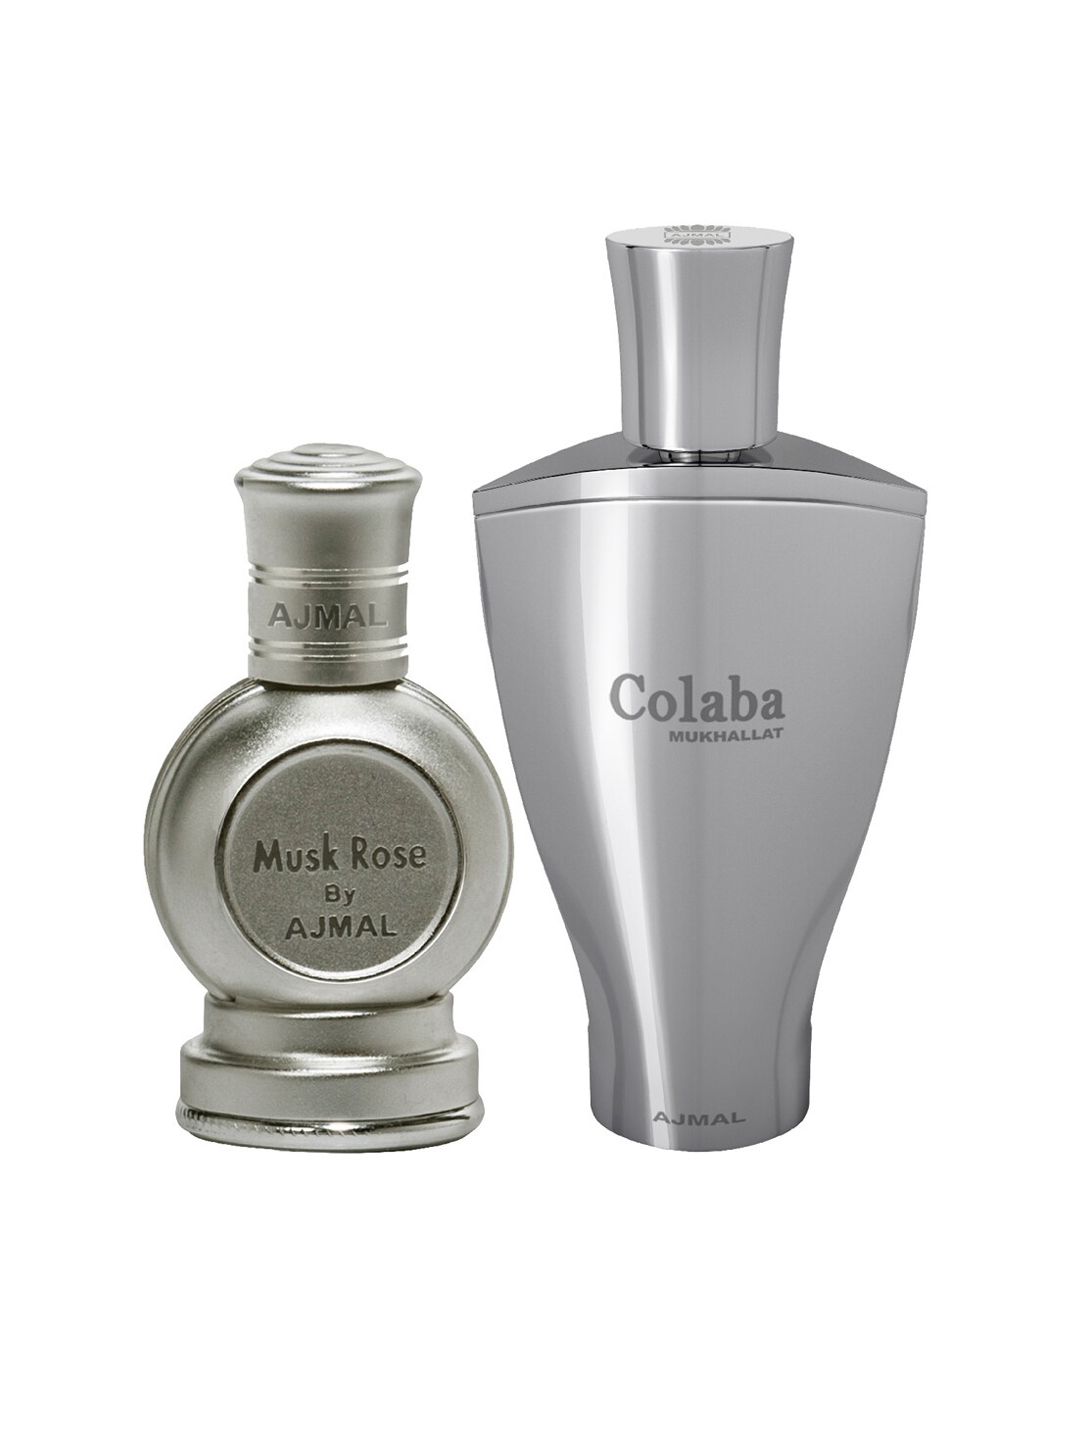 Ajmal Musk Rose Concentrated Perfume 12 ml & Colaba Mukhallat Concentrated Perfume 14 ml Price in India